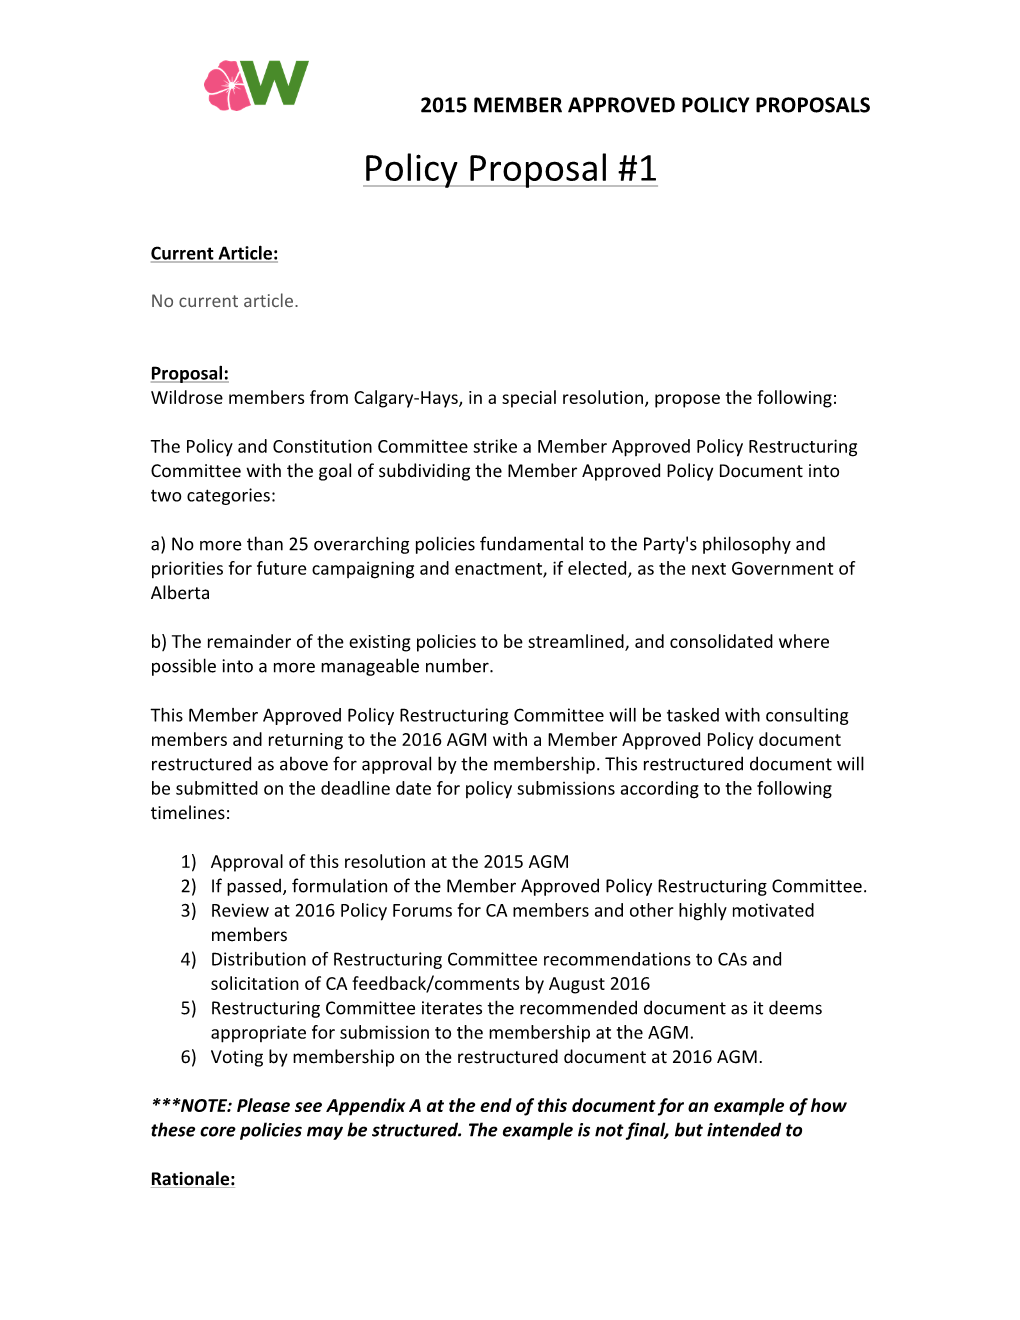 Policy Proposal #1